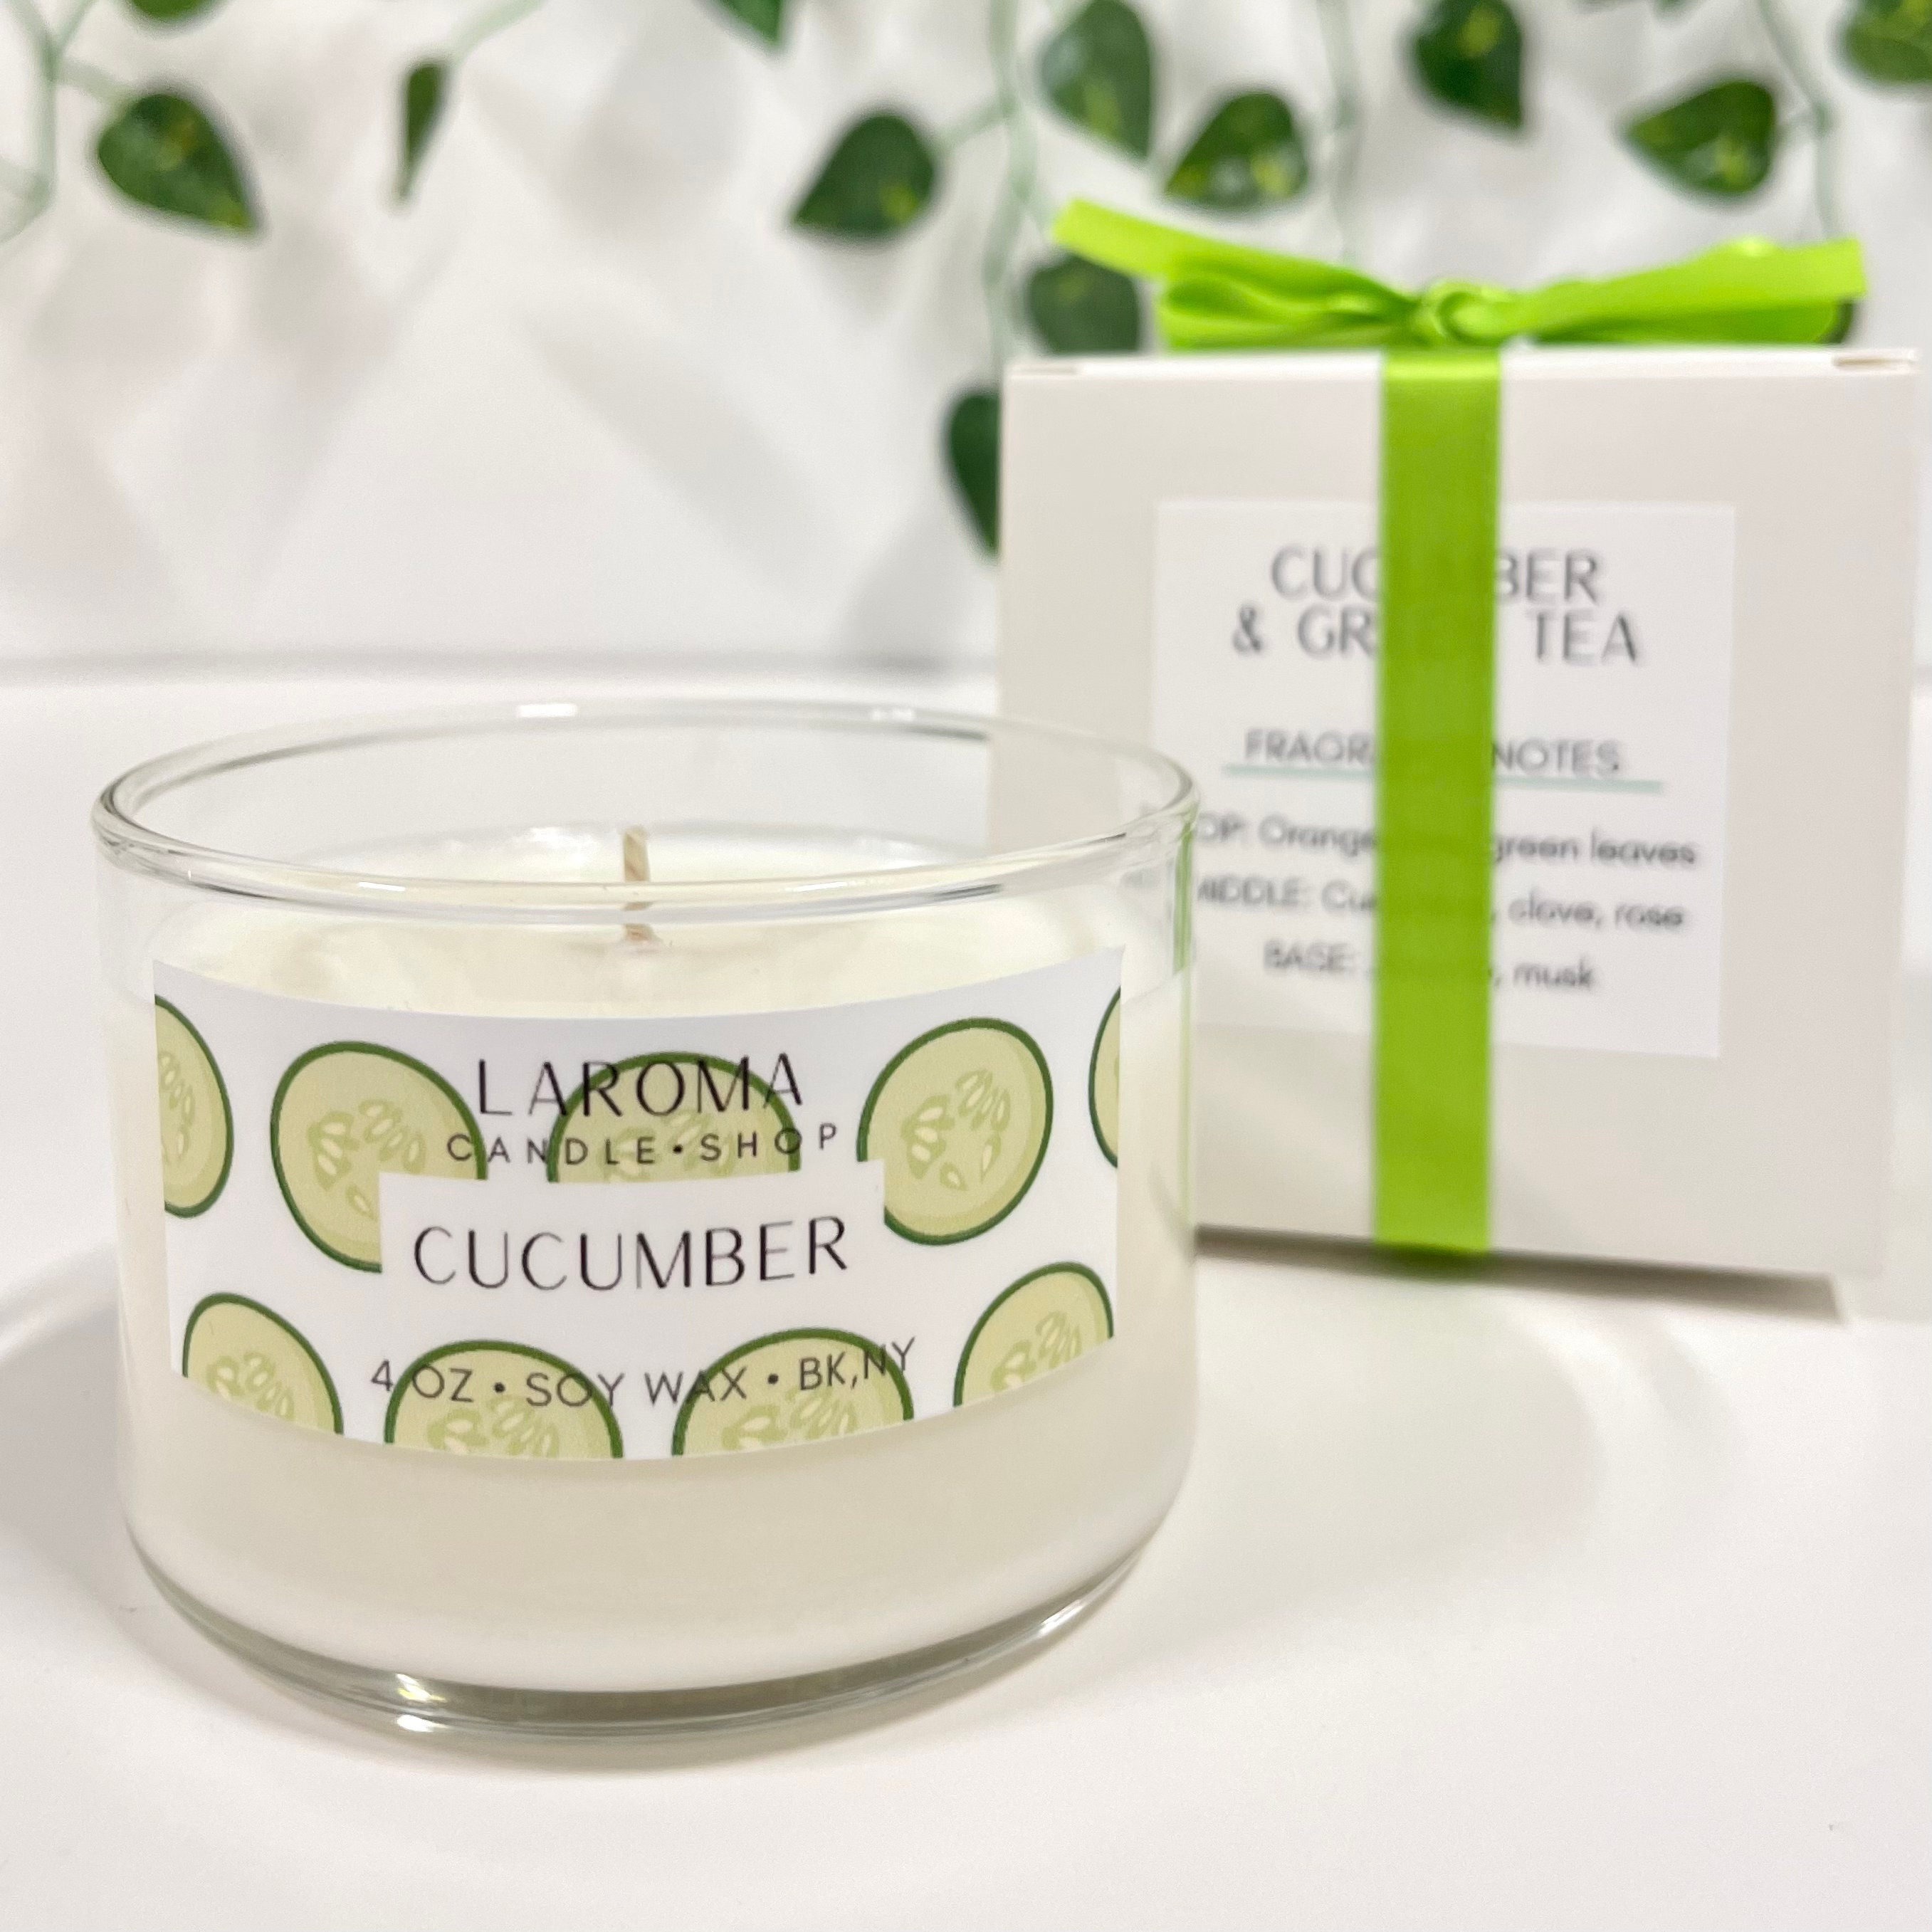 Jasmine and Green Tea scented 2.75 oz Candle